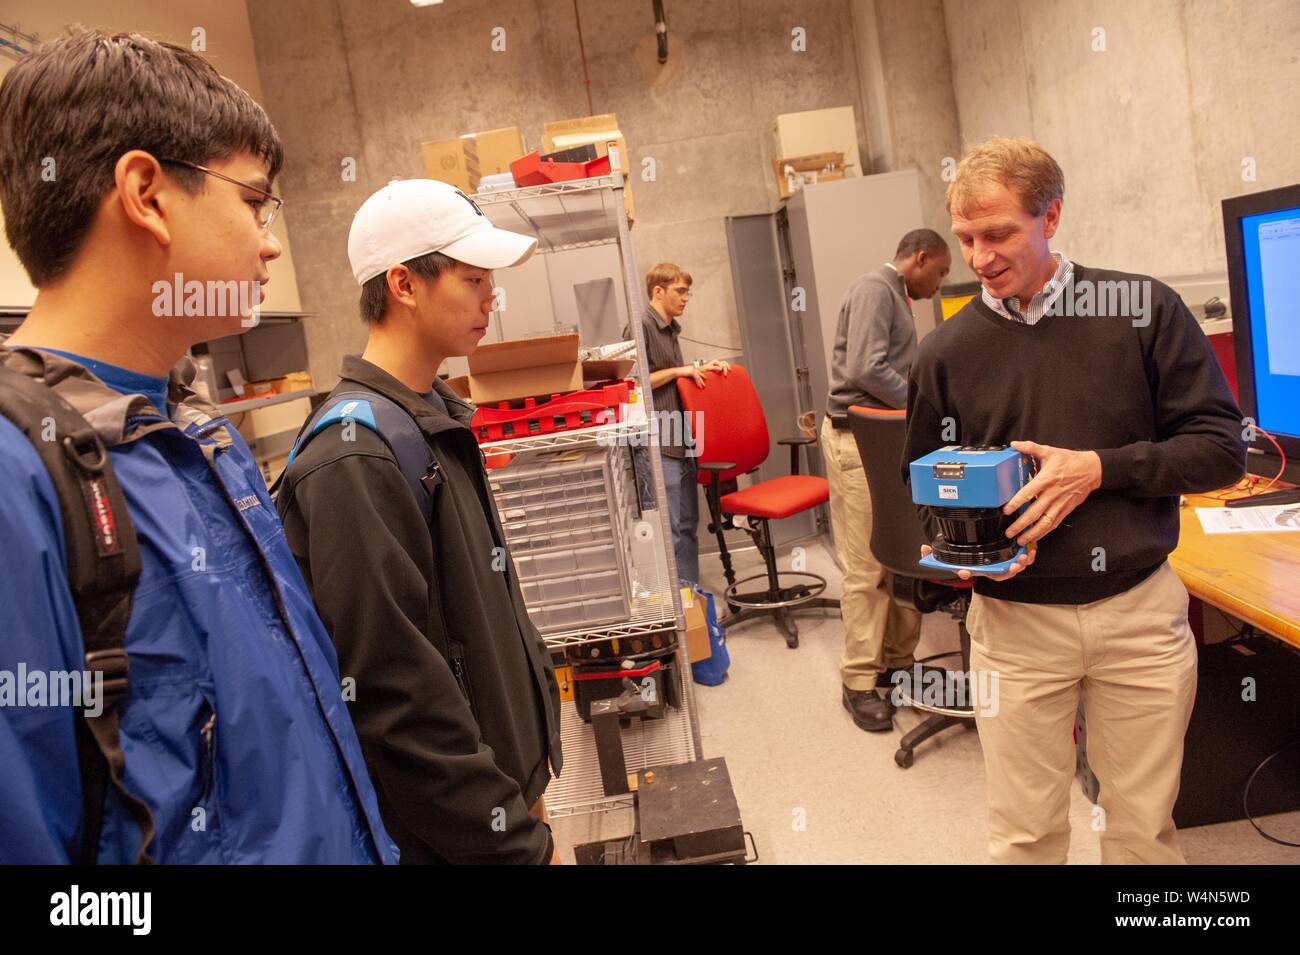 A person shows an apparatus to members of the Johns Hopkins Robotics Club, in a room with computer equipment, at the Johns Hopkins University, Baltimore, Maryland, December, 2009. From the Homewood Photography Collection. () Stock Photo